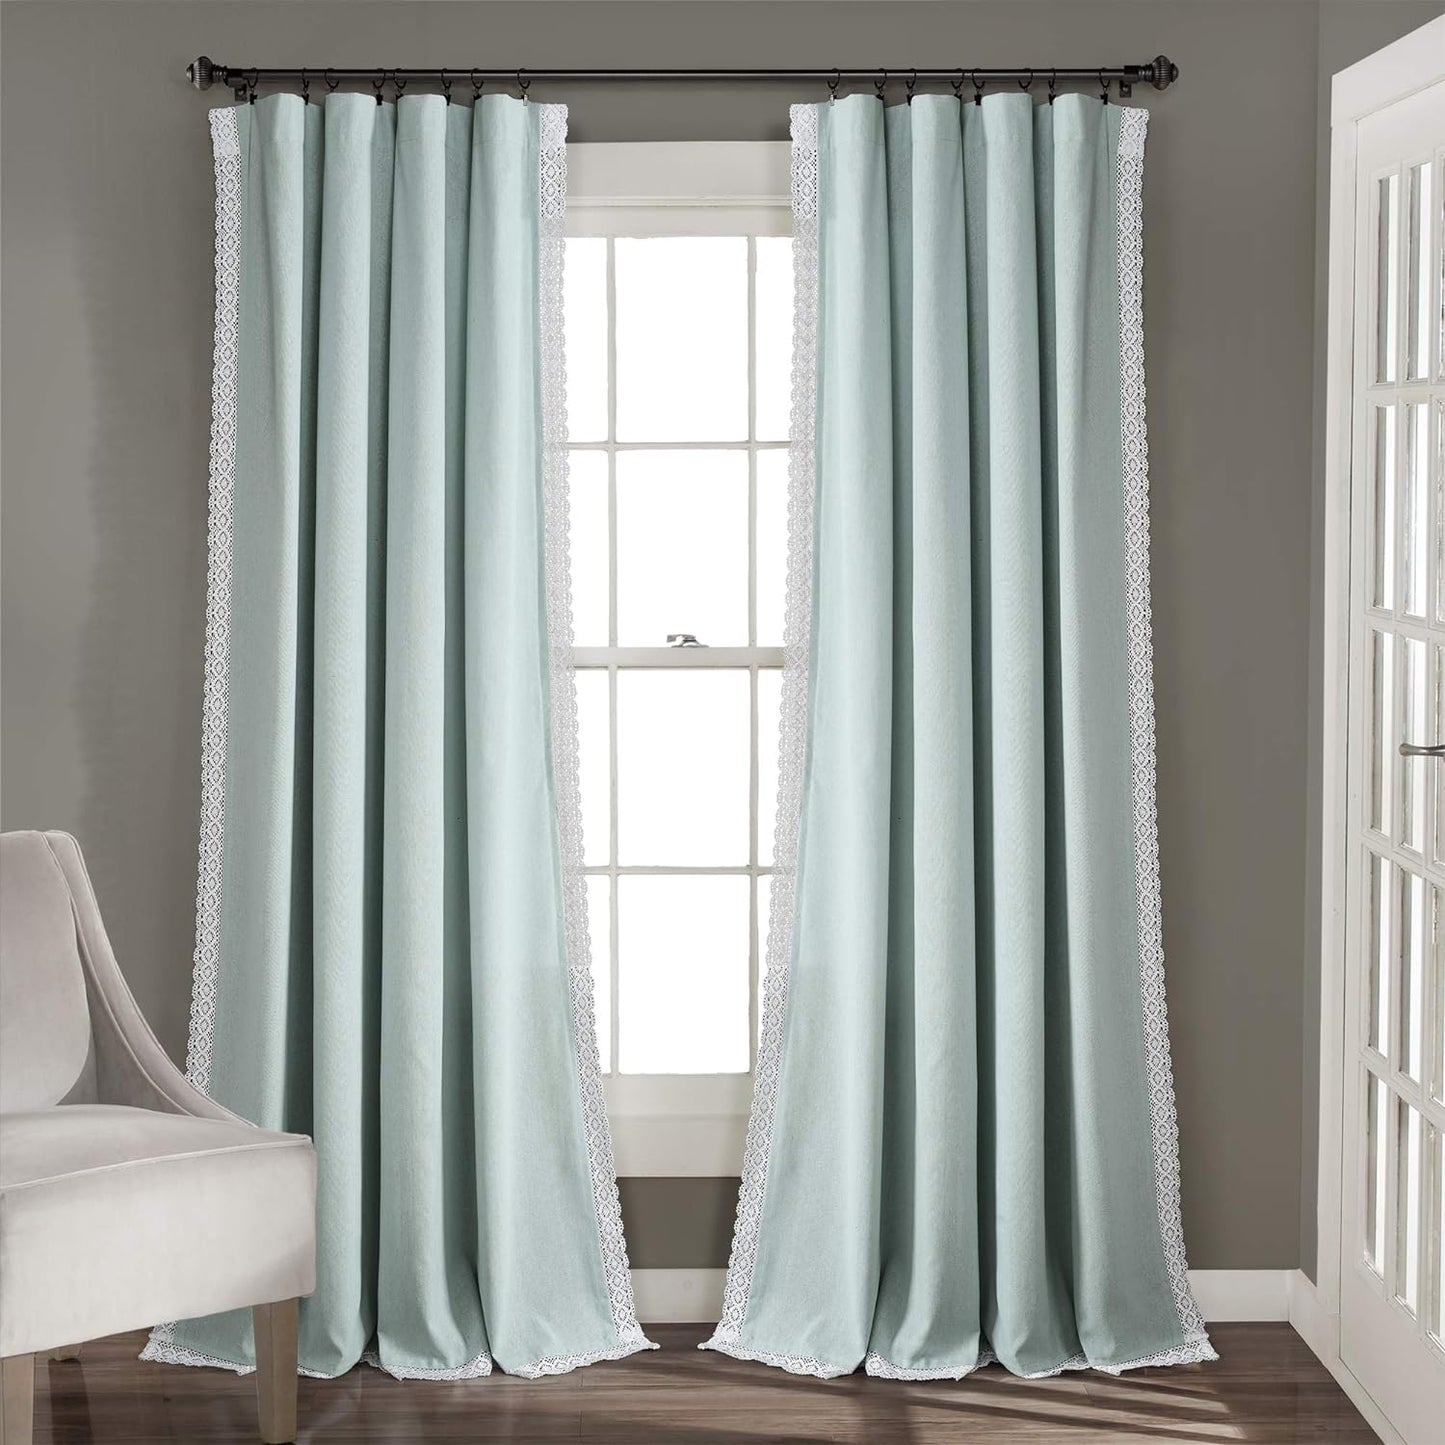 Lush Decor Rosalie Light Filtering Window Curtain Panel Set- Pair- Vintage Farmhouse & French Country Style Curtains - Timeless Dreamy Drape - Romantic Lace Trim - 54" W X 84" L, White  Triangle Home Fashions Blue Window Panel 54"W X 95"L